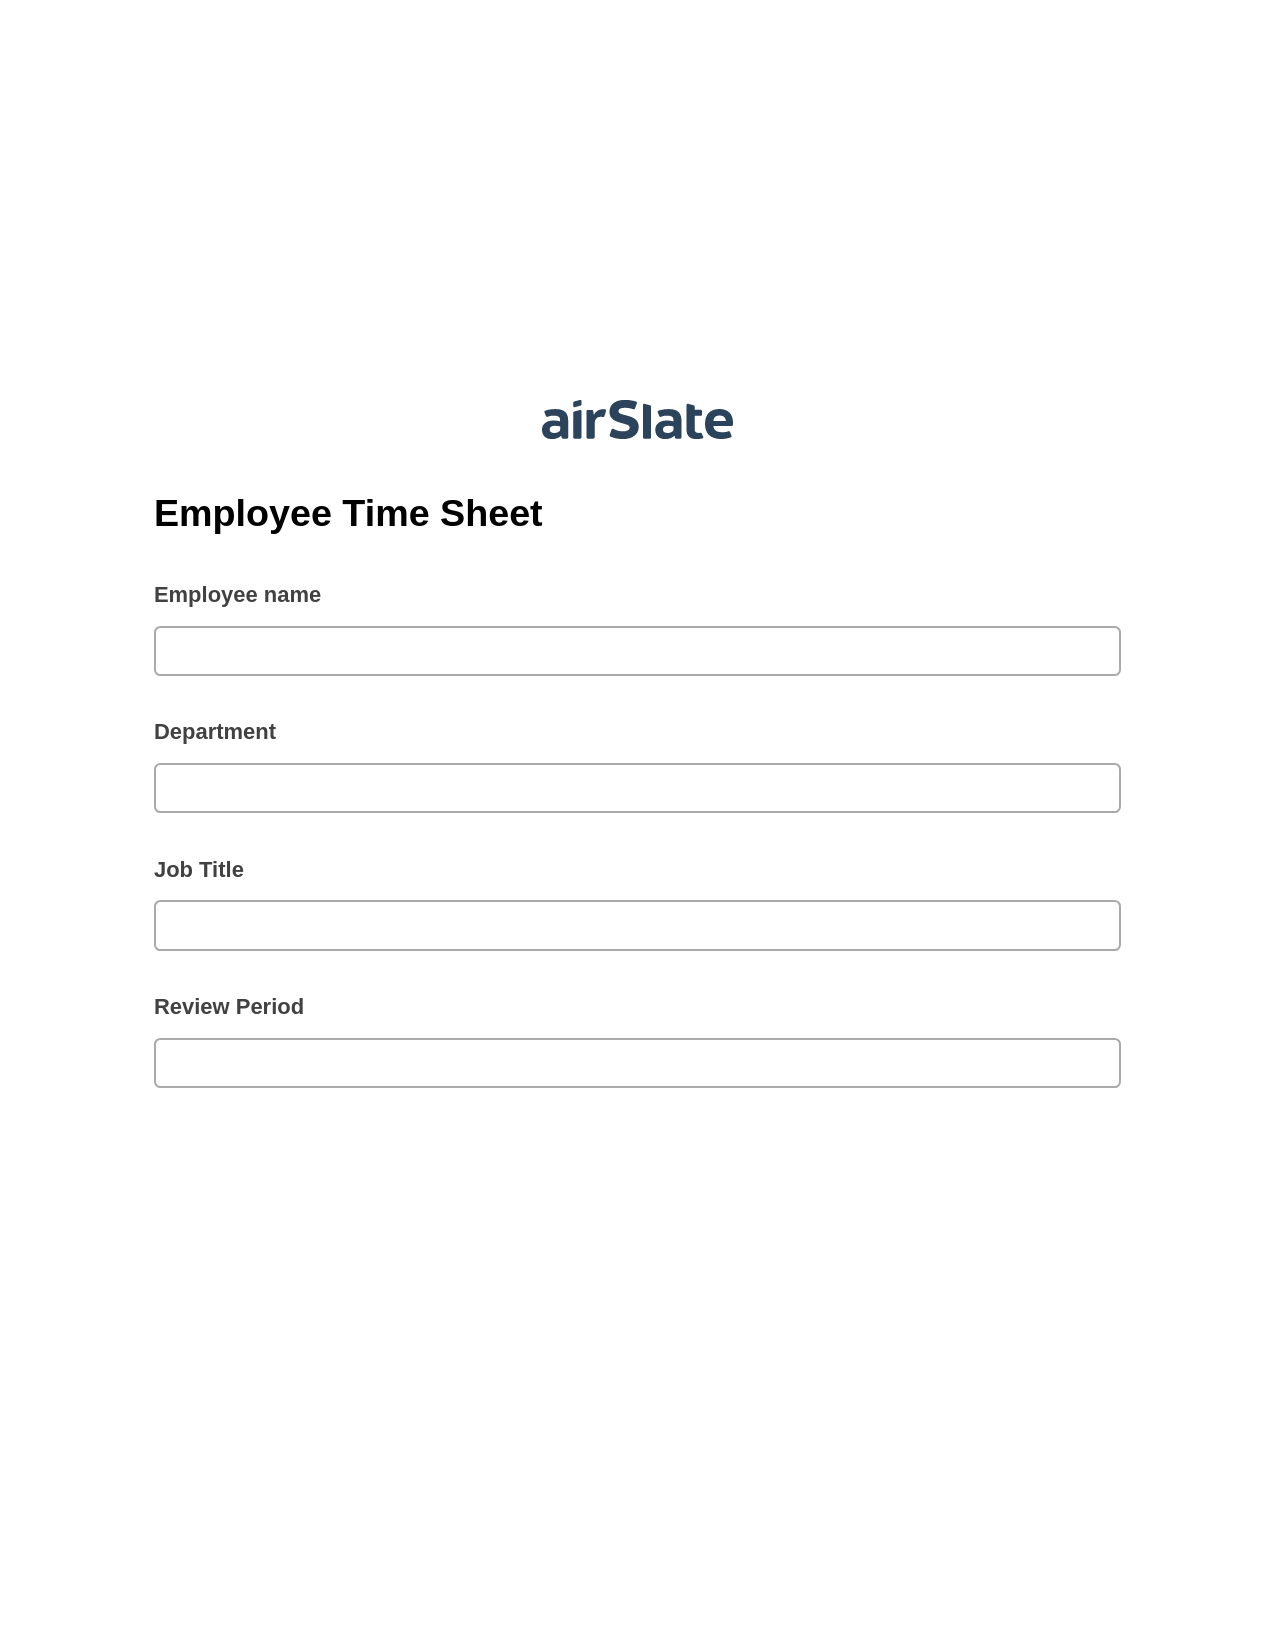 Employee Time Sheet Pre-fill from Excel Spreadsheet Bot, Create Salesforce Records Bot, Slack Notification Postfinish Bot